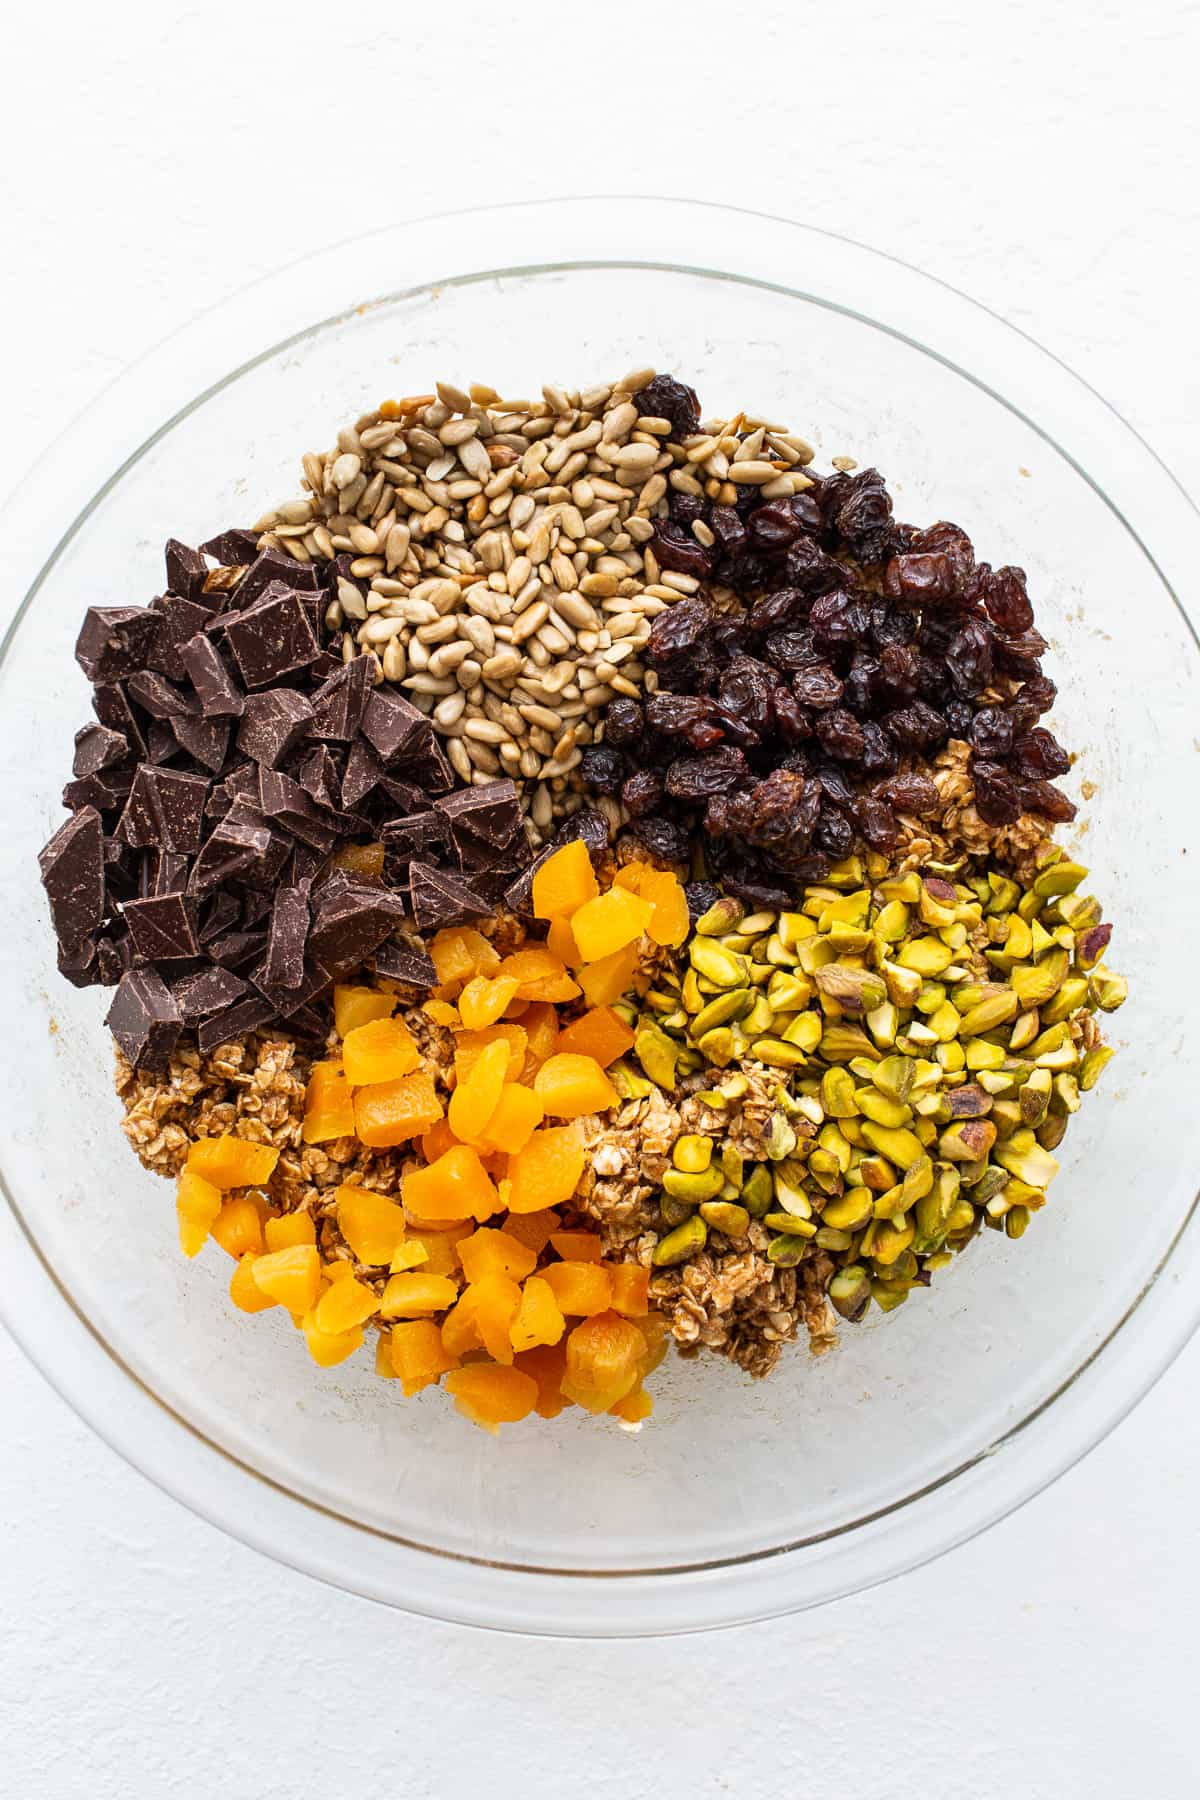 Trail mix cookie ingredients in a bowl.